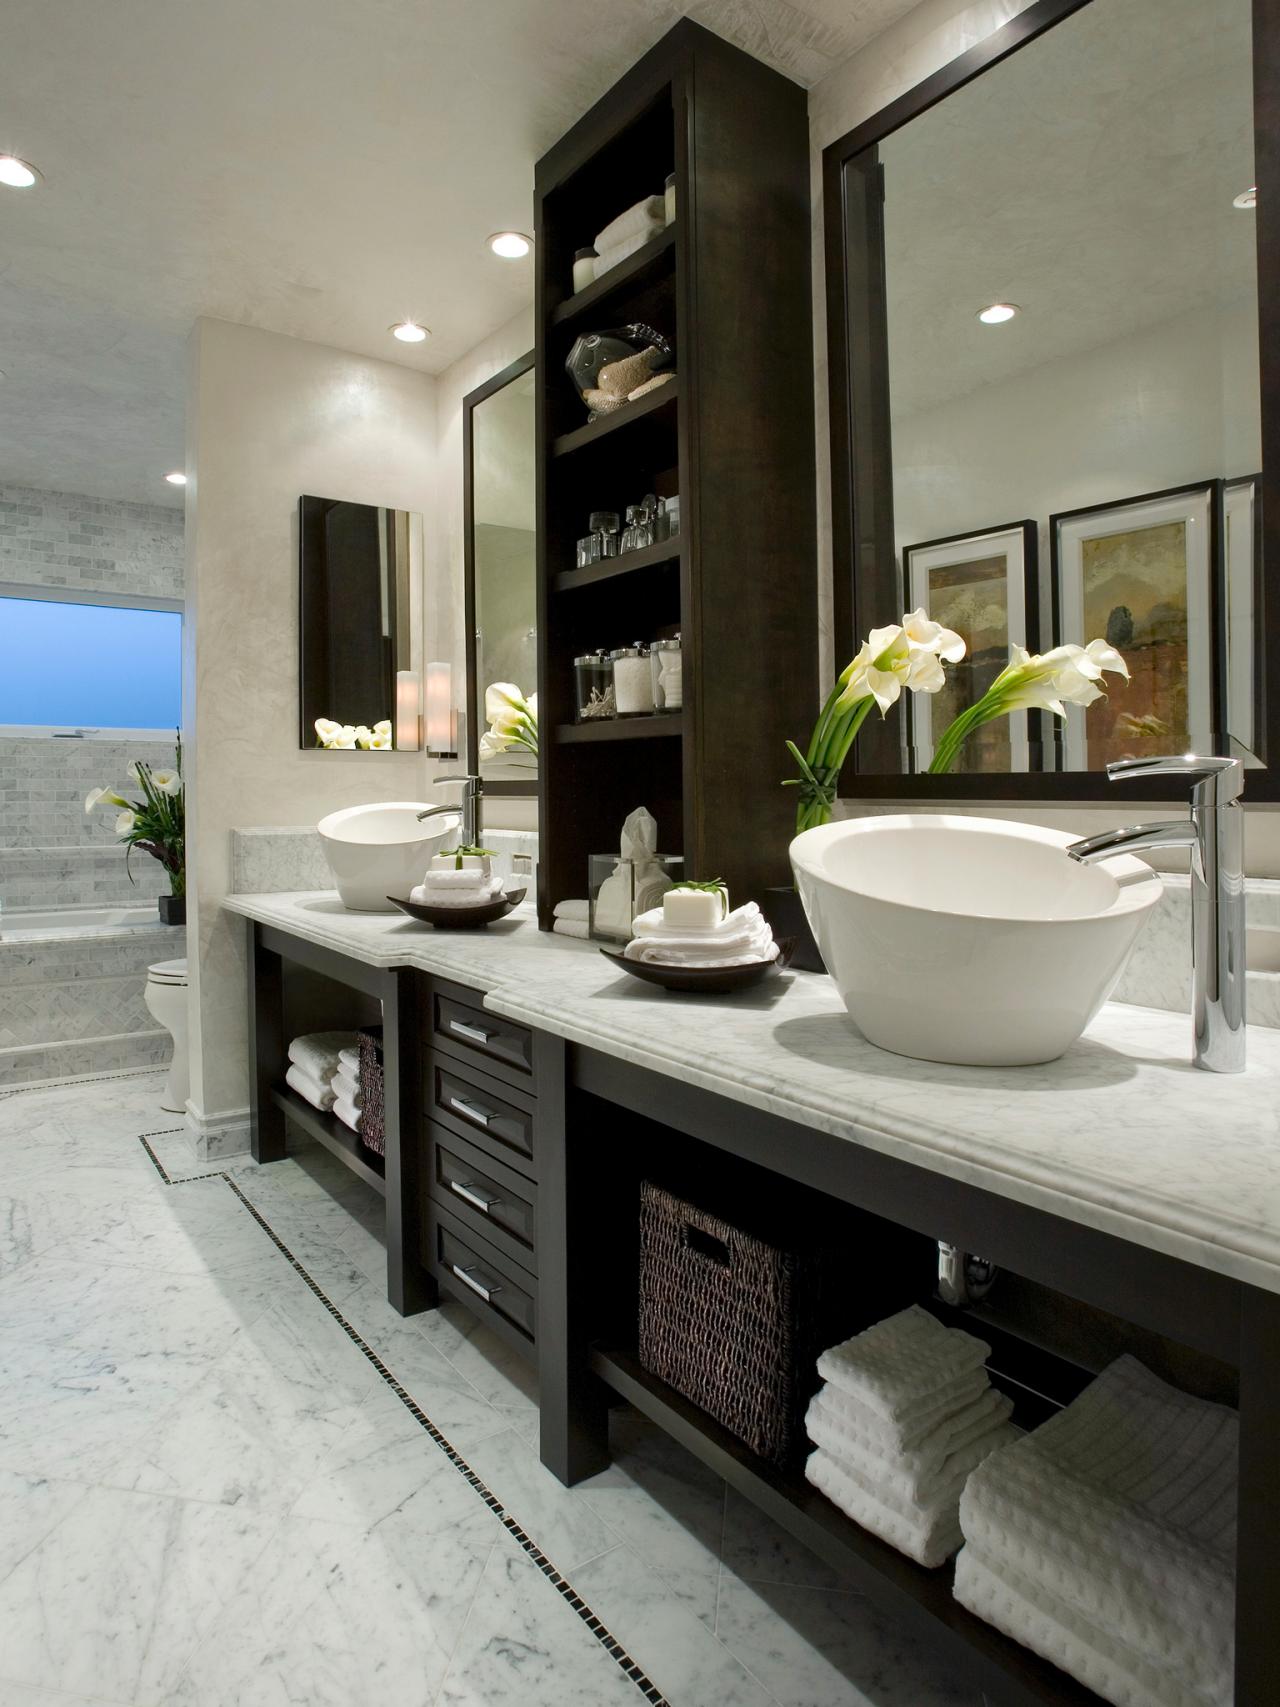 Interested in a Wet Room Learn More About This Hot Bathroom Style